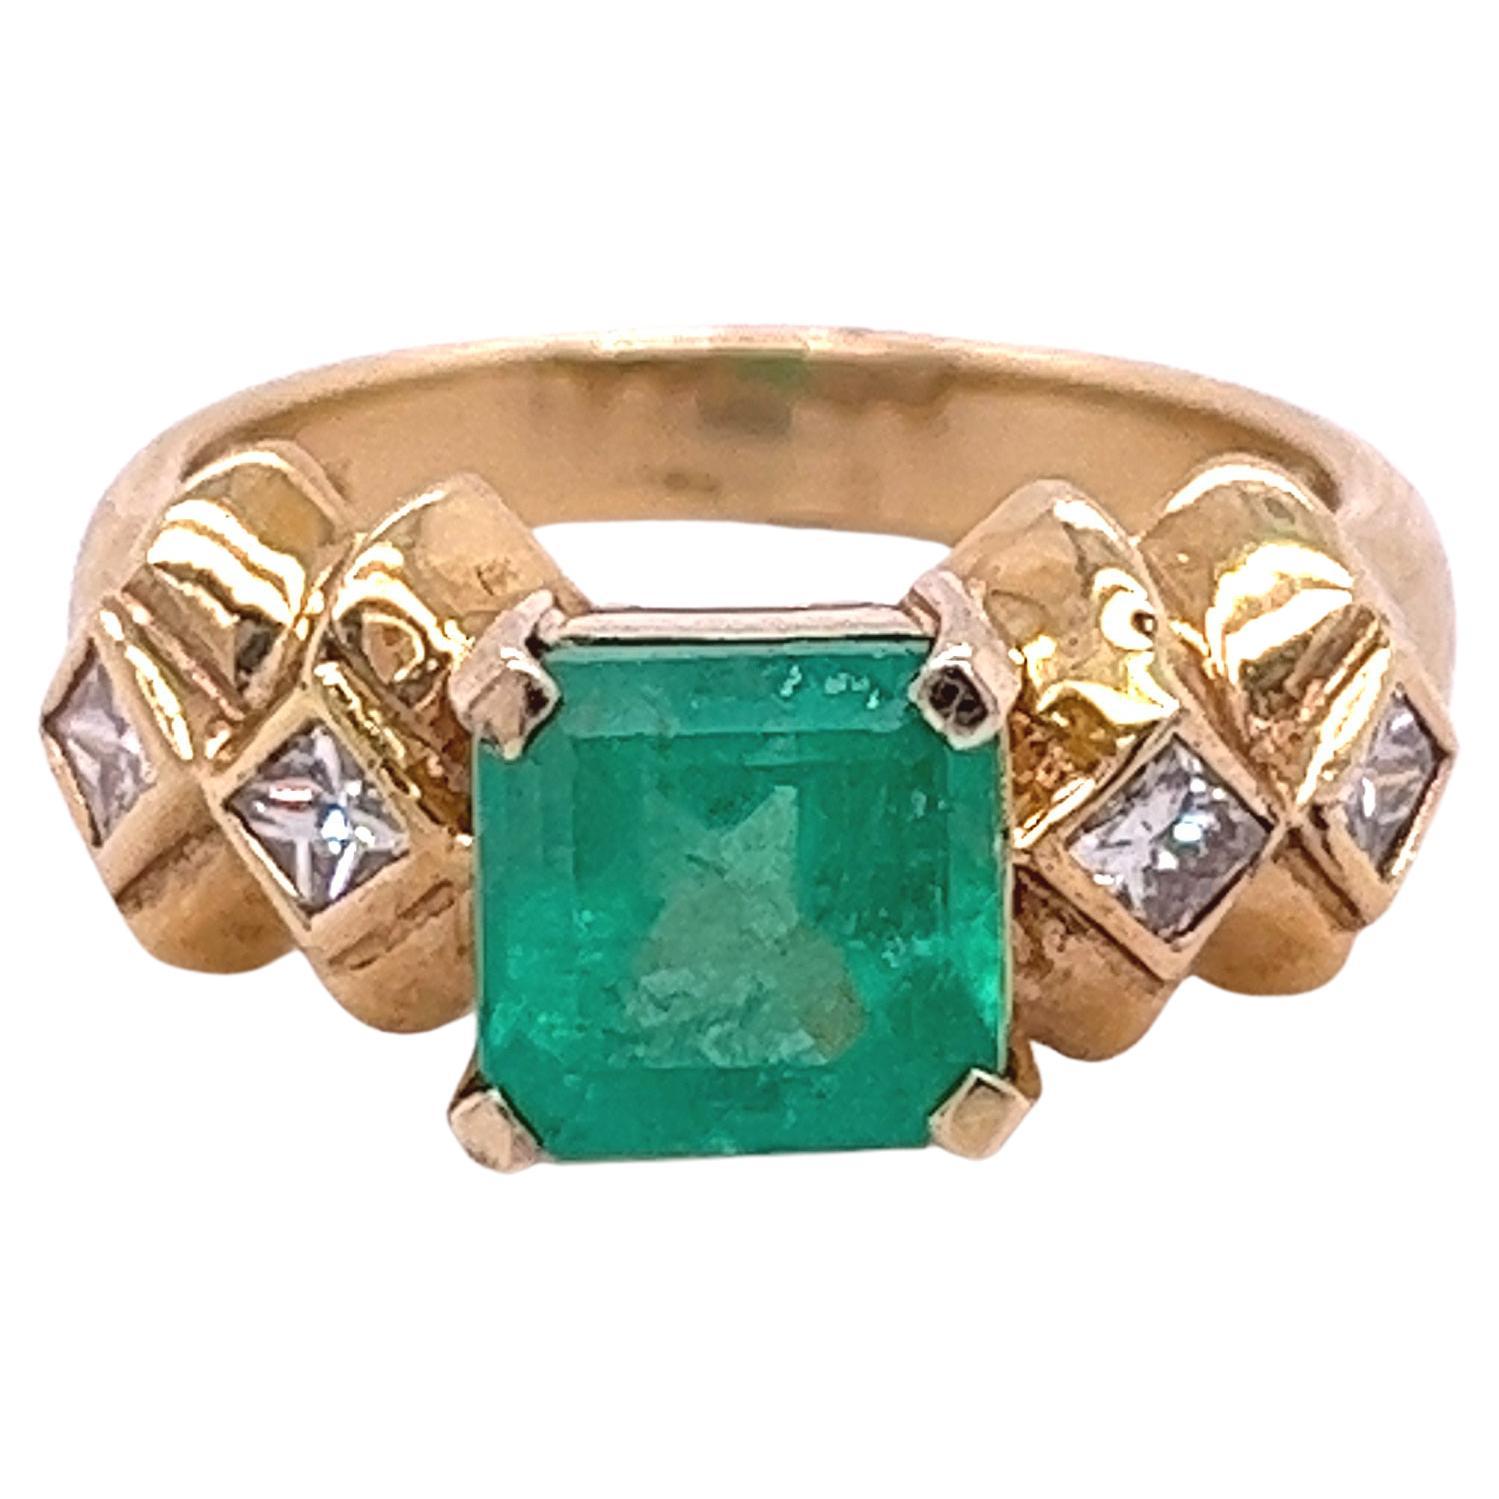 1.84 Carat Colombian Emerald and Princess Cut Diamond in 14k Yellow Gold Ring For Sale